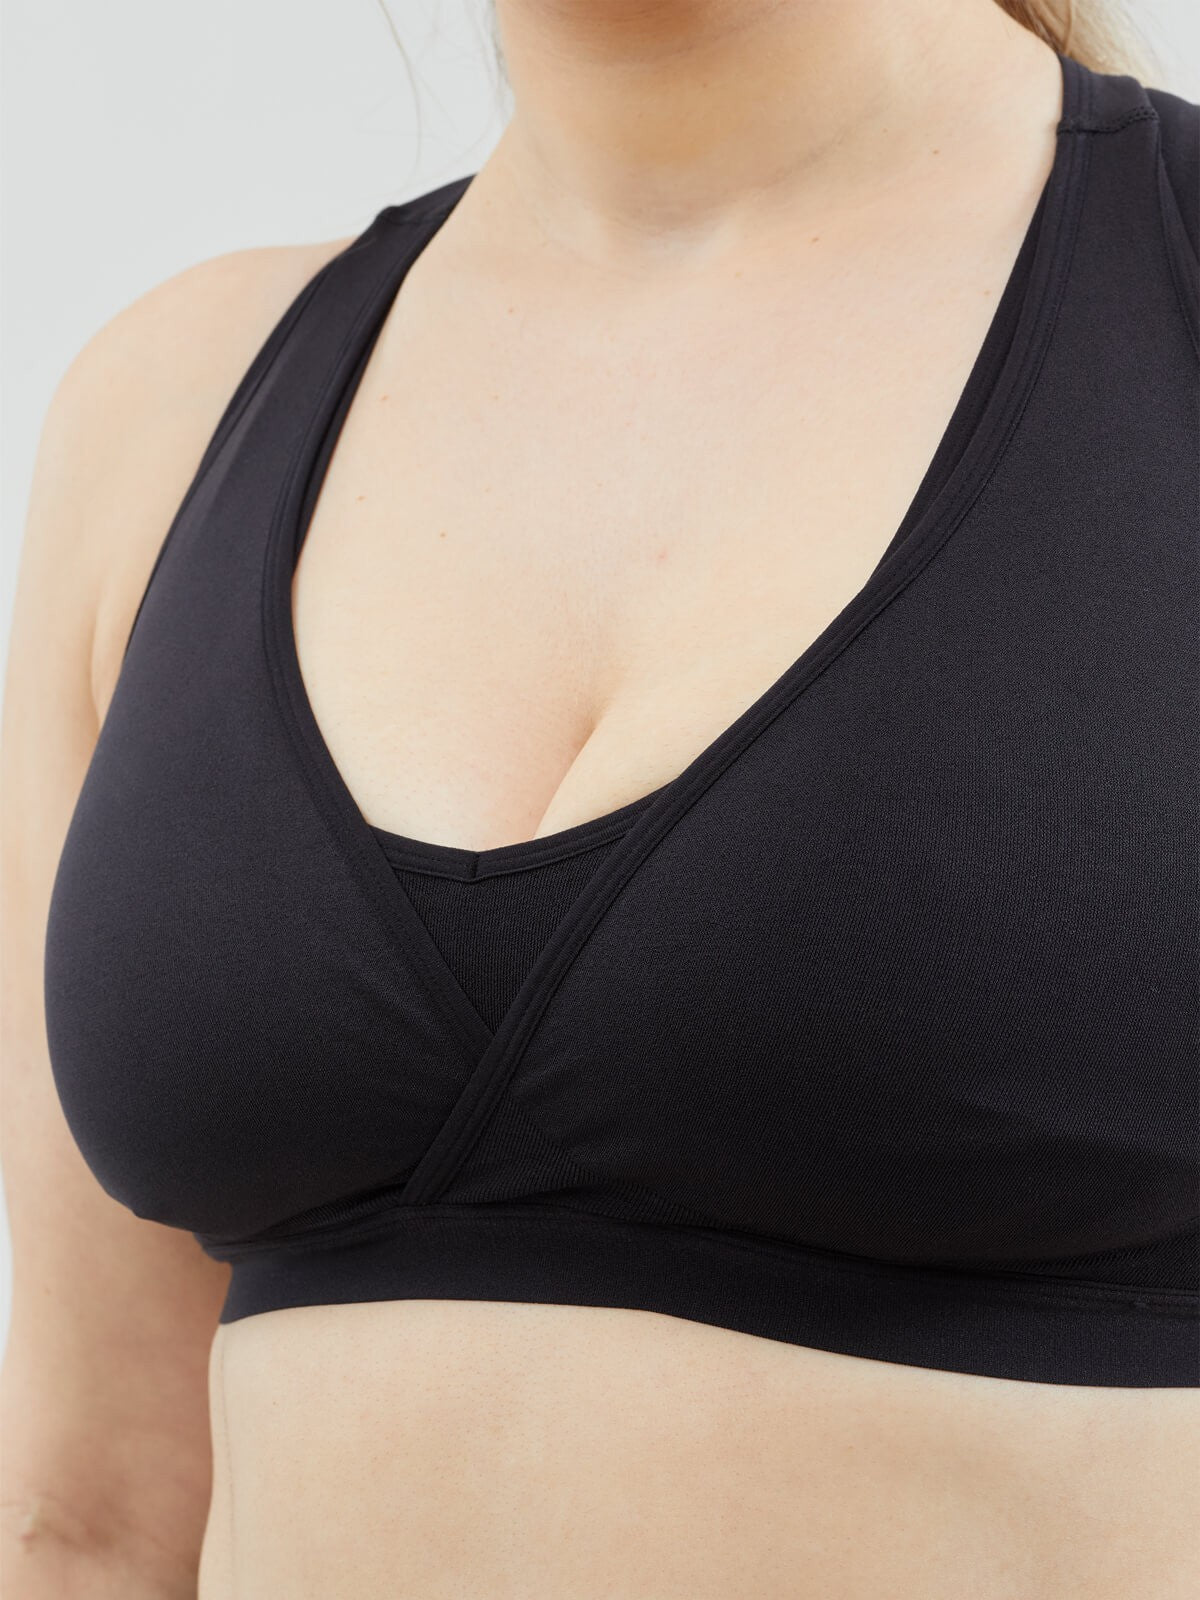 Breastfeeding Support: Nursing Bras - Minute With Mary